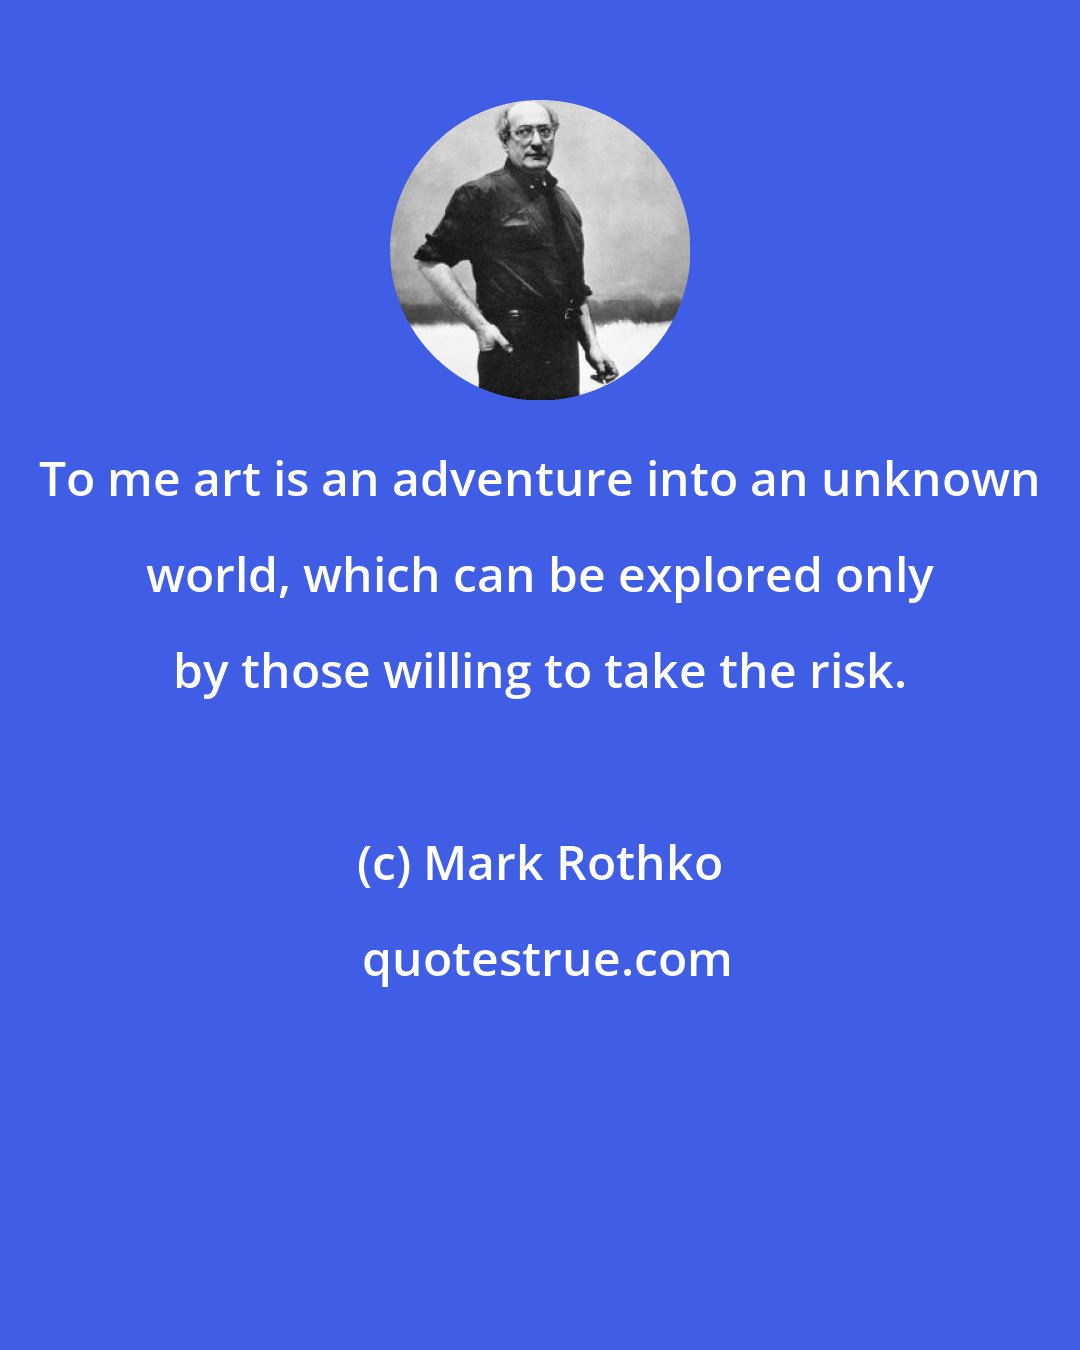 Mark Rothko: To me art is an adventure into an unknown world, which can be explored only by those willing to take the risk.